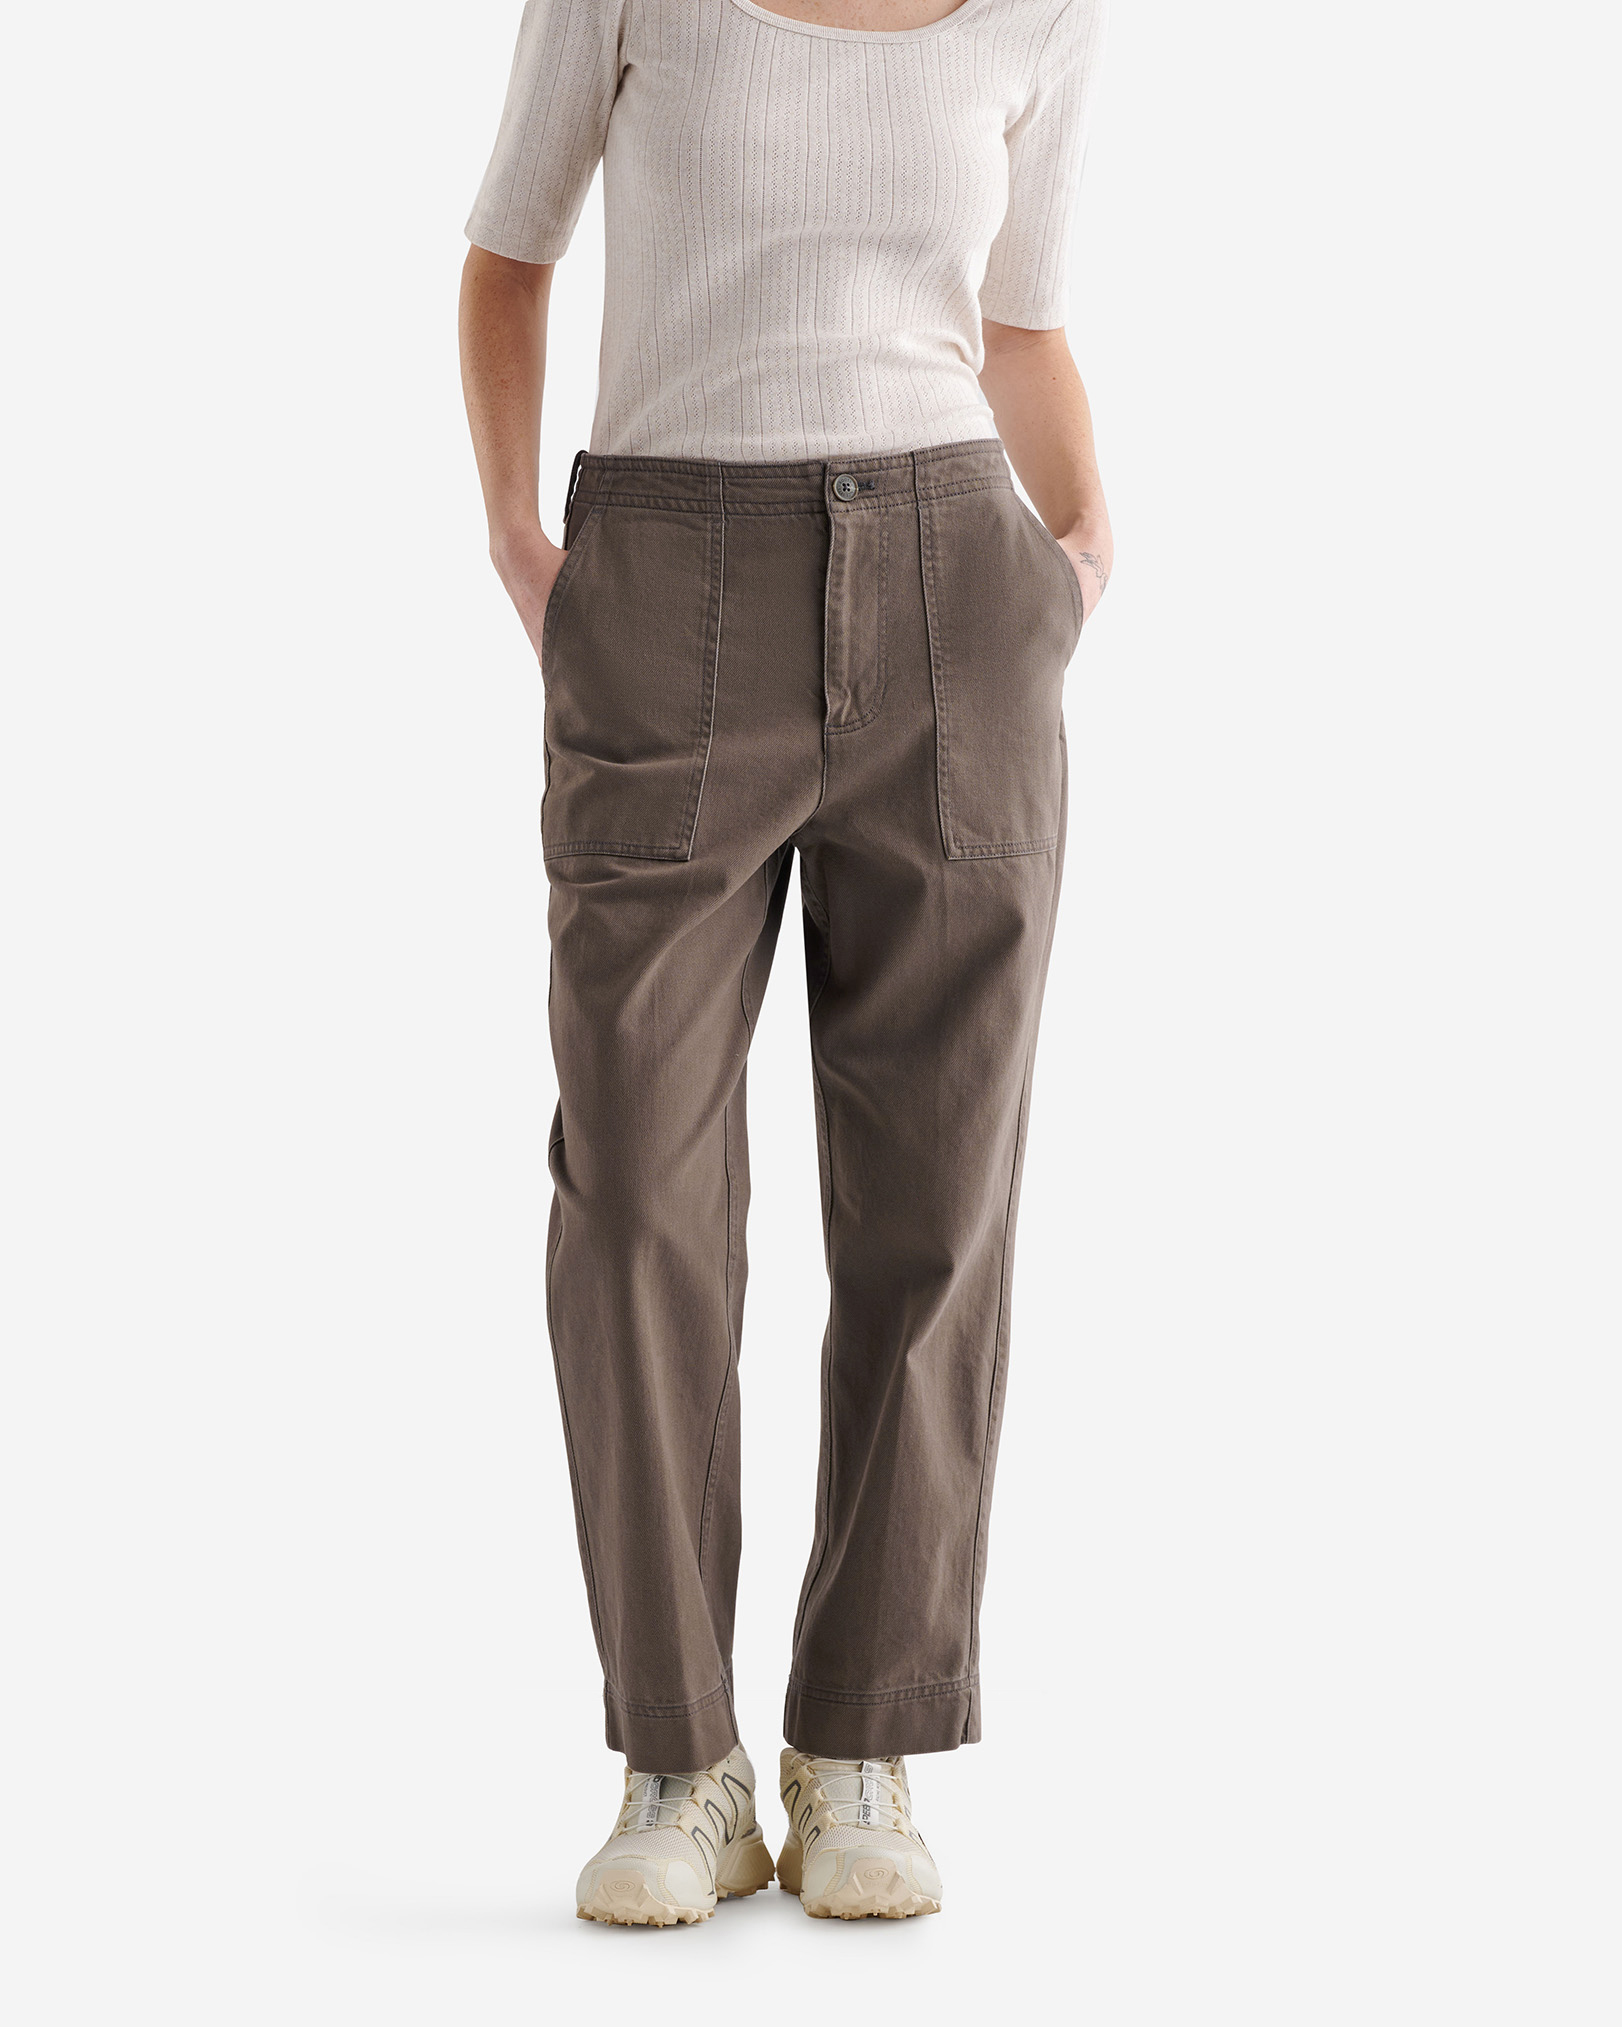 Roots Miette Utility Pant in Acorn Brown